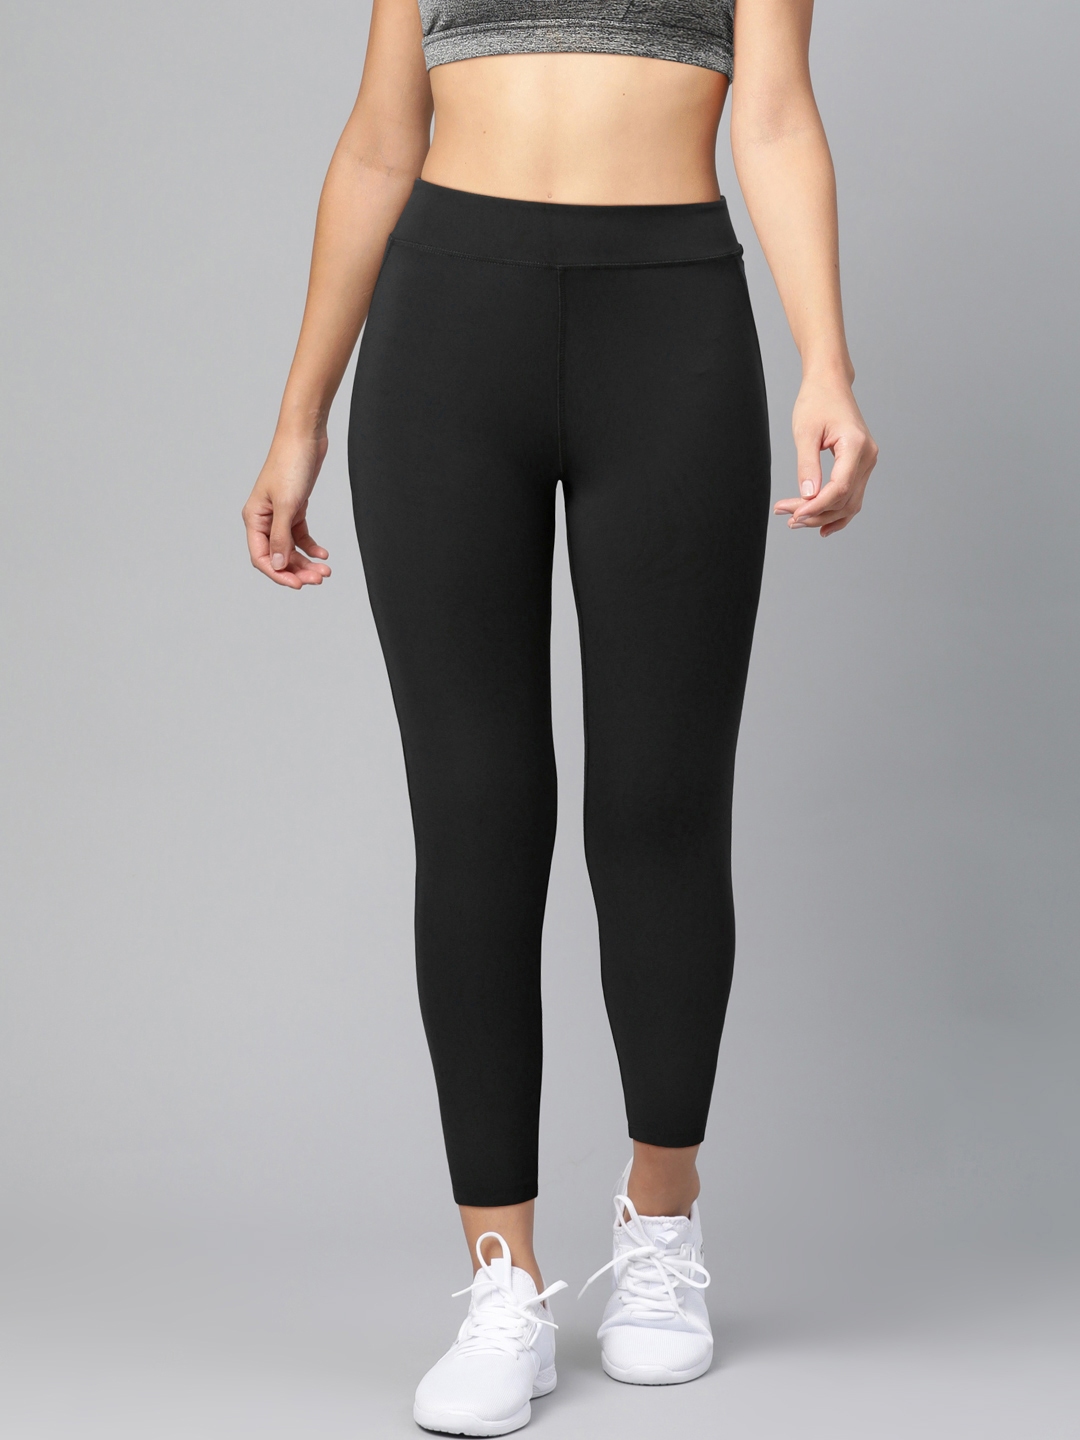 Buy Reebok Women Black Solid Workout Ready PP HR Training Tights ...